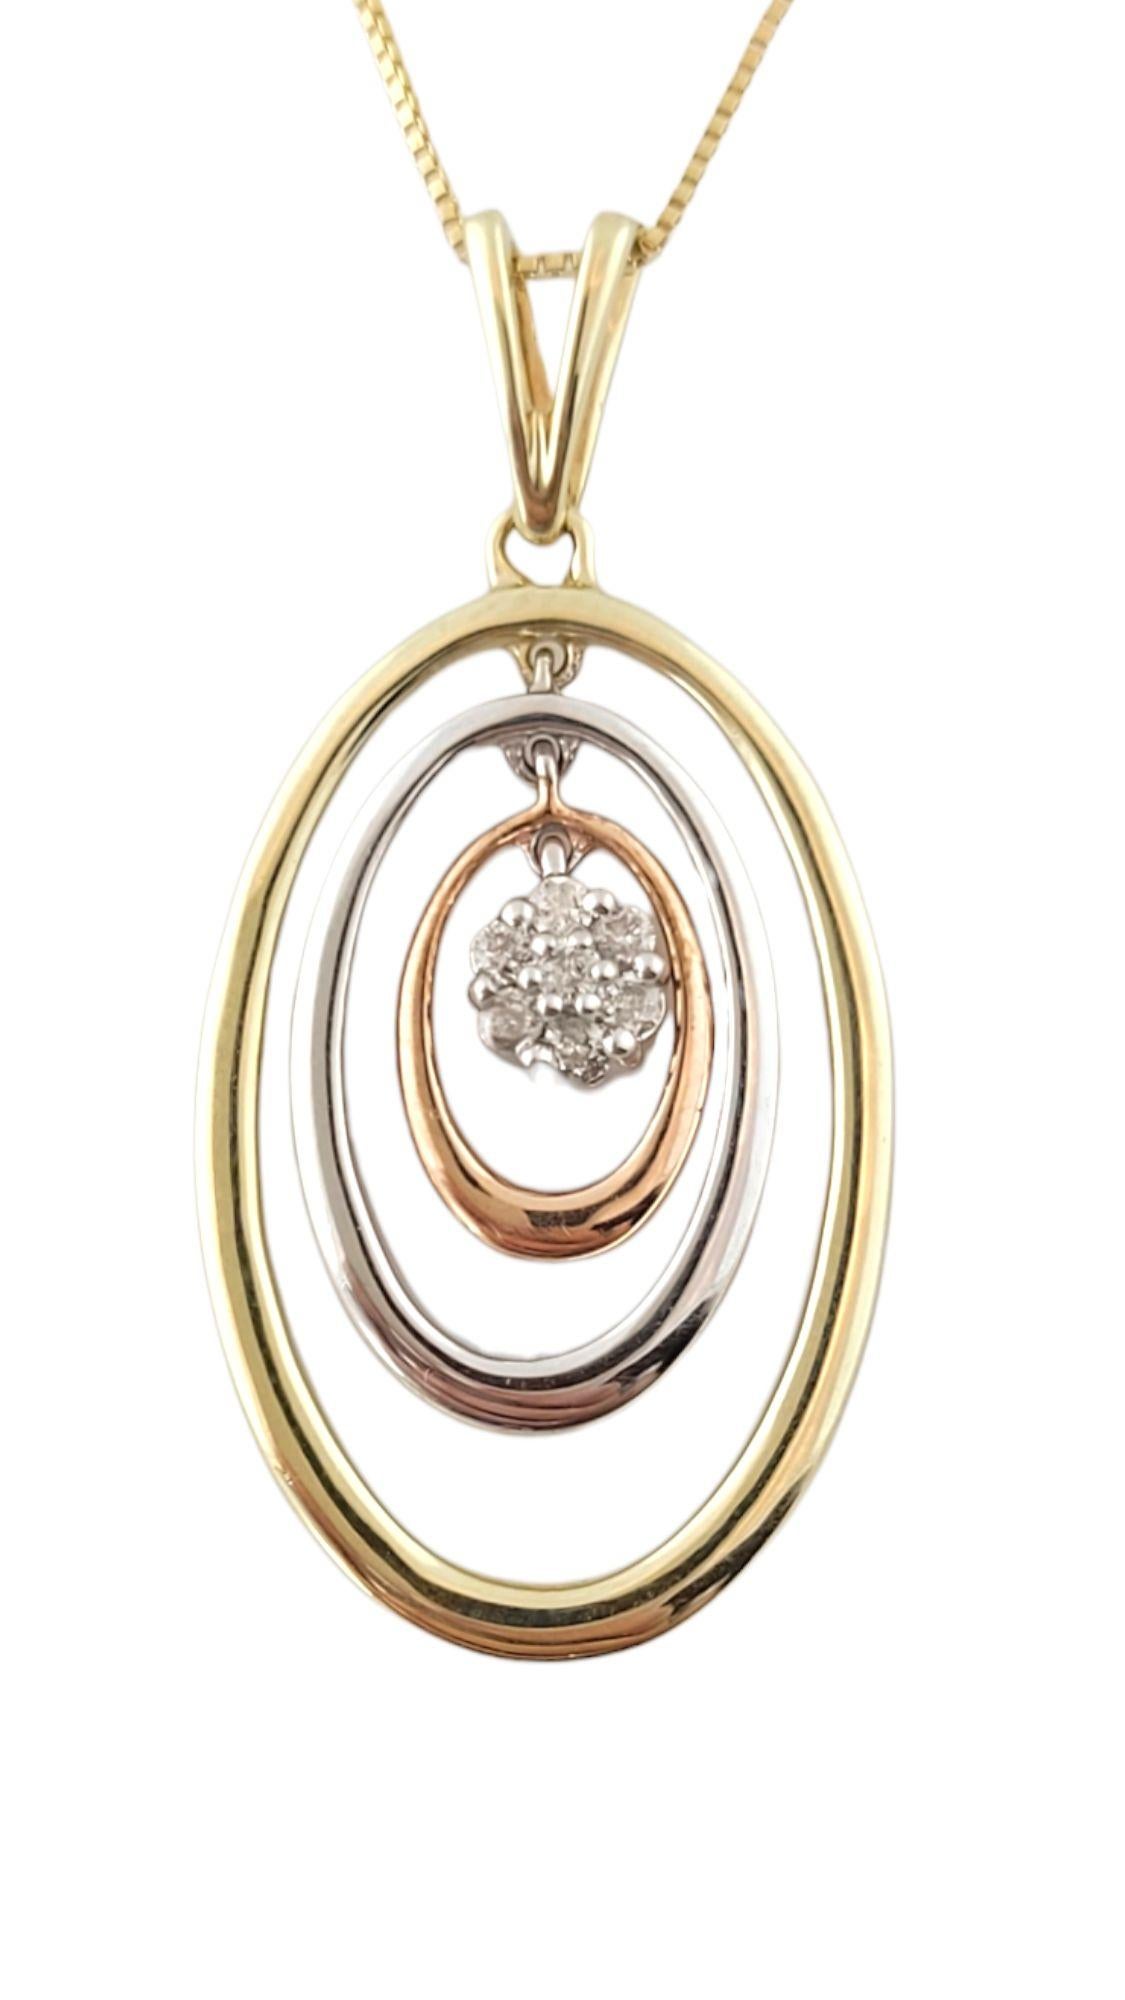 This gorgeous 10K gold pendant has a yellow, white, and rose gold oval all surrounding 7 sparkling round brilliant cut diamonds in the center! This piece is paired with a beautiful 10K yellow gold chain.

Total approximate diamond weight: 0.05